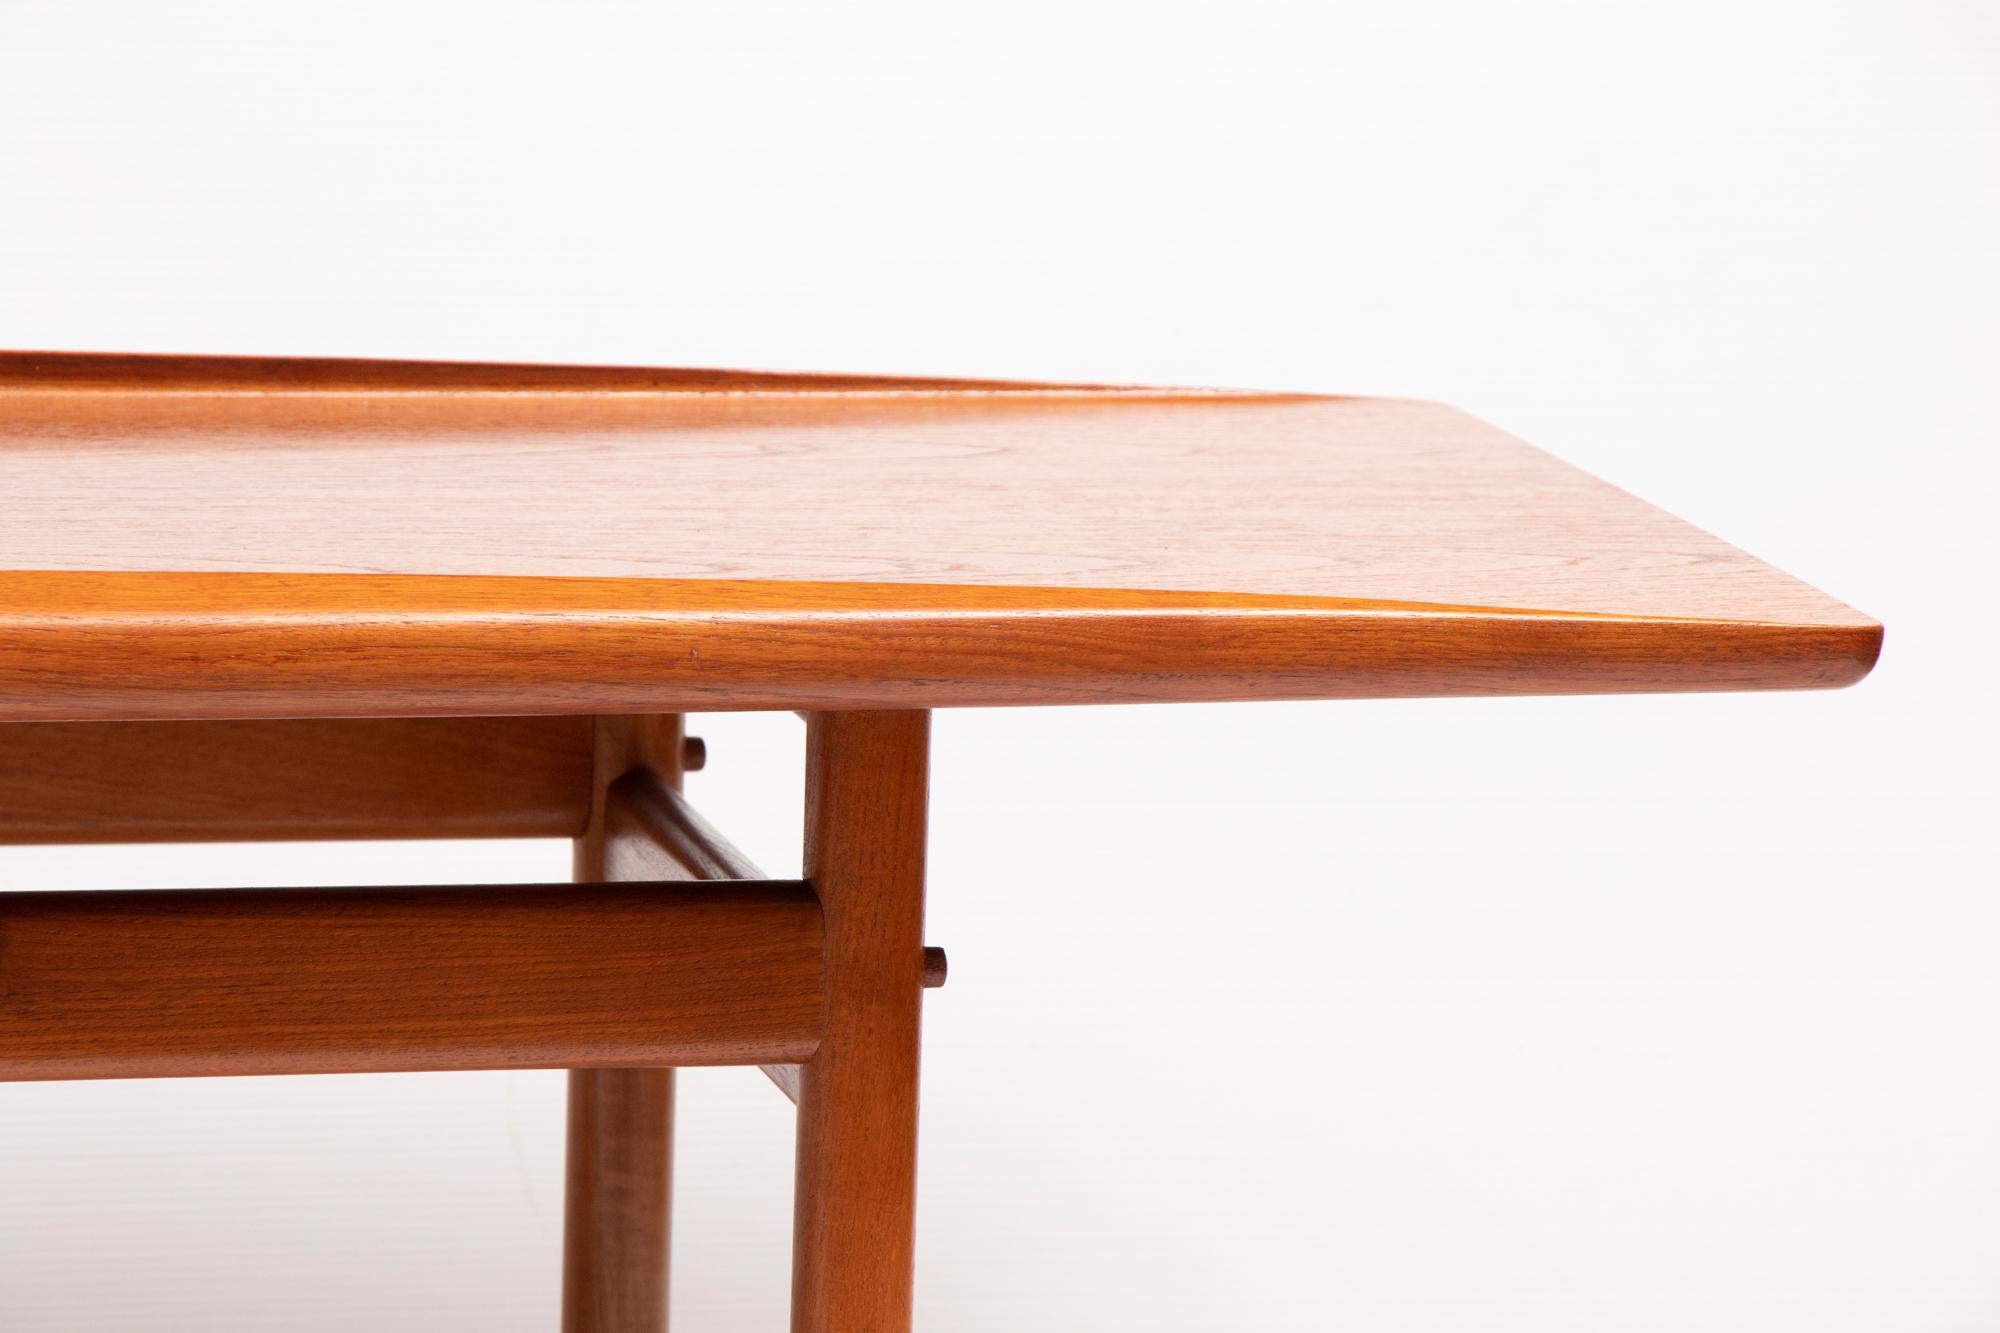 Danish teak coffee table by Grete Jalk for Poul Jeppesen, circa 1960. Often called 'The Surfboard Table' it has organic sculpted edges.